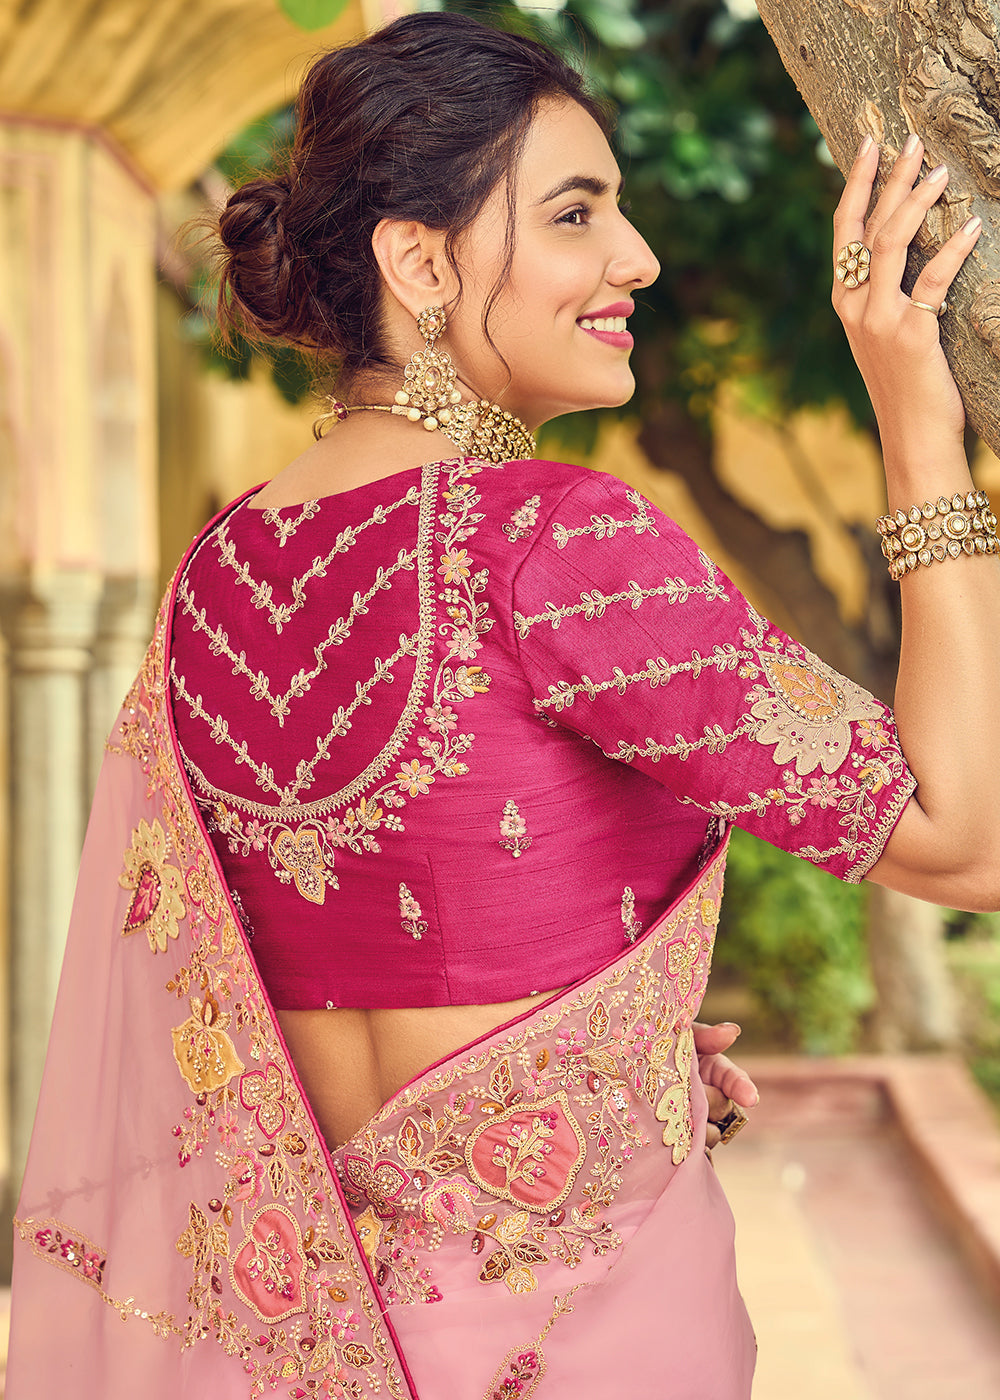 Thulian Pink Designer Organza Saree with Intricate Embroidery work